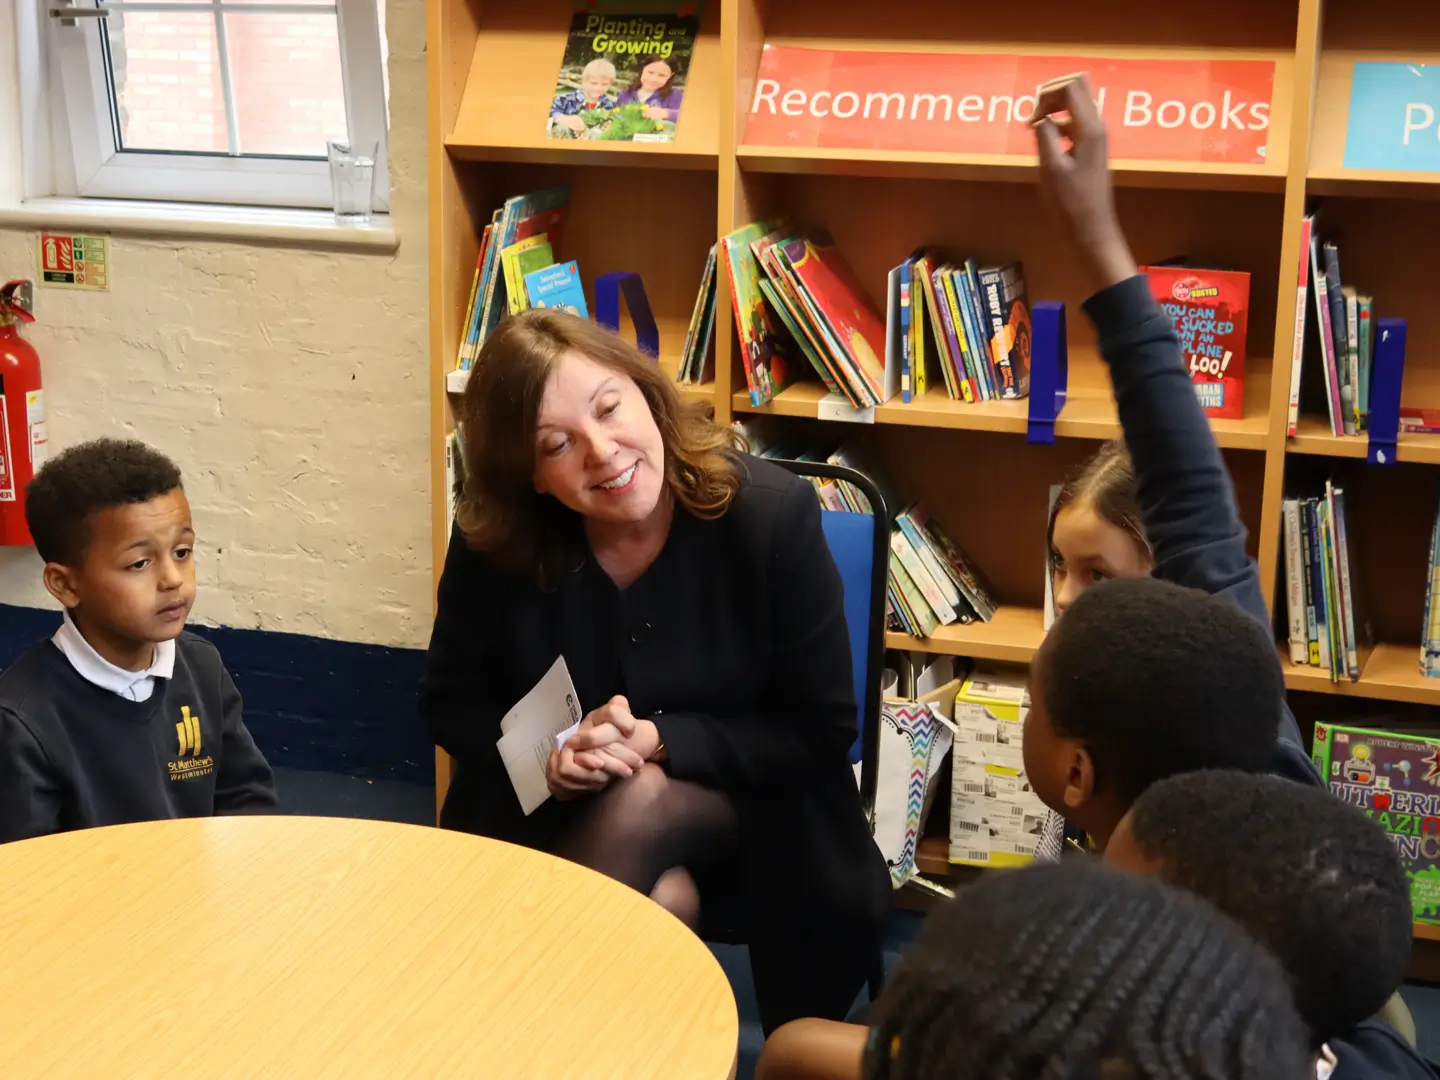 Children's commissioner talking to your children at books without borders